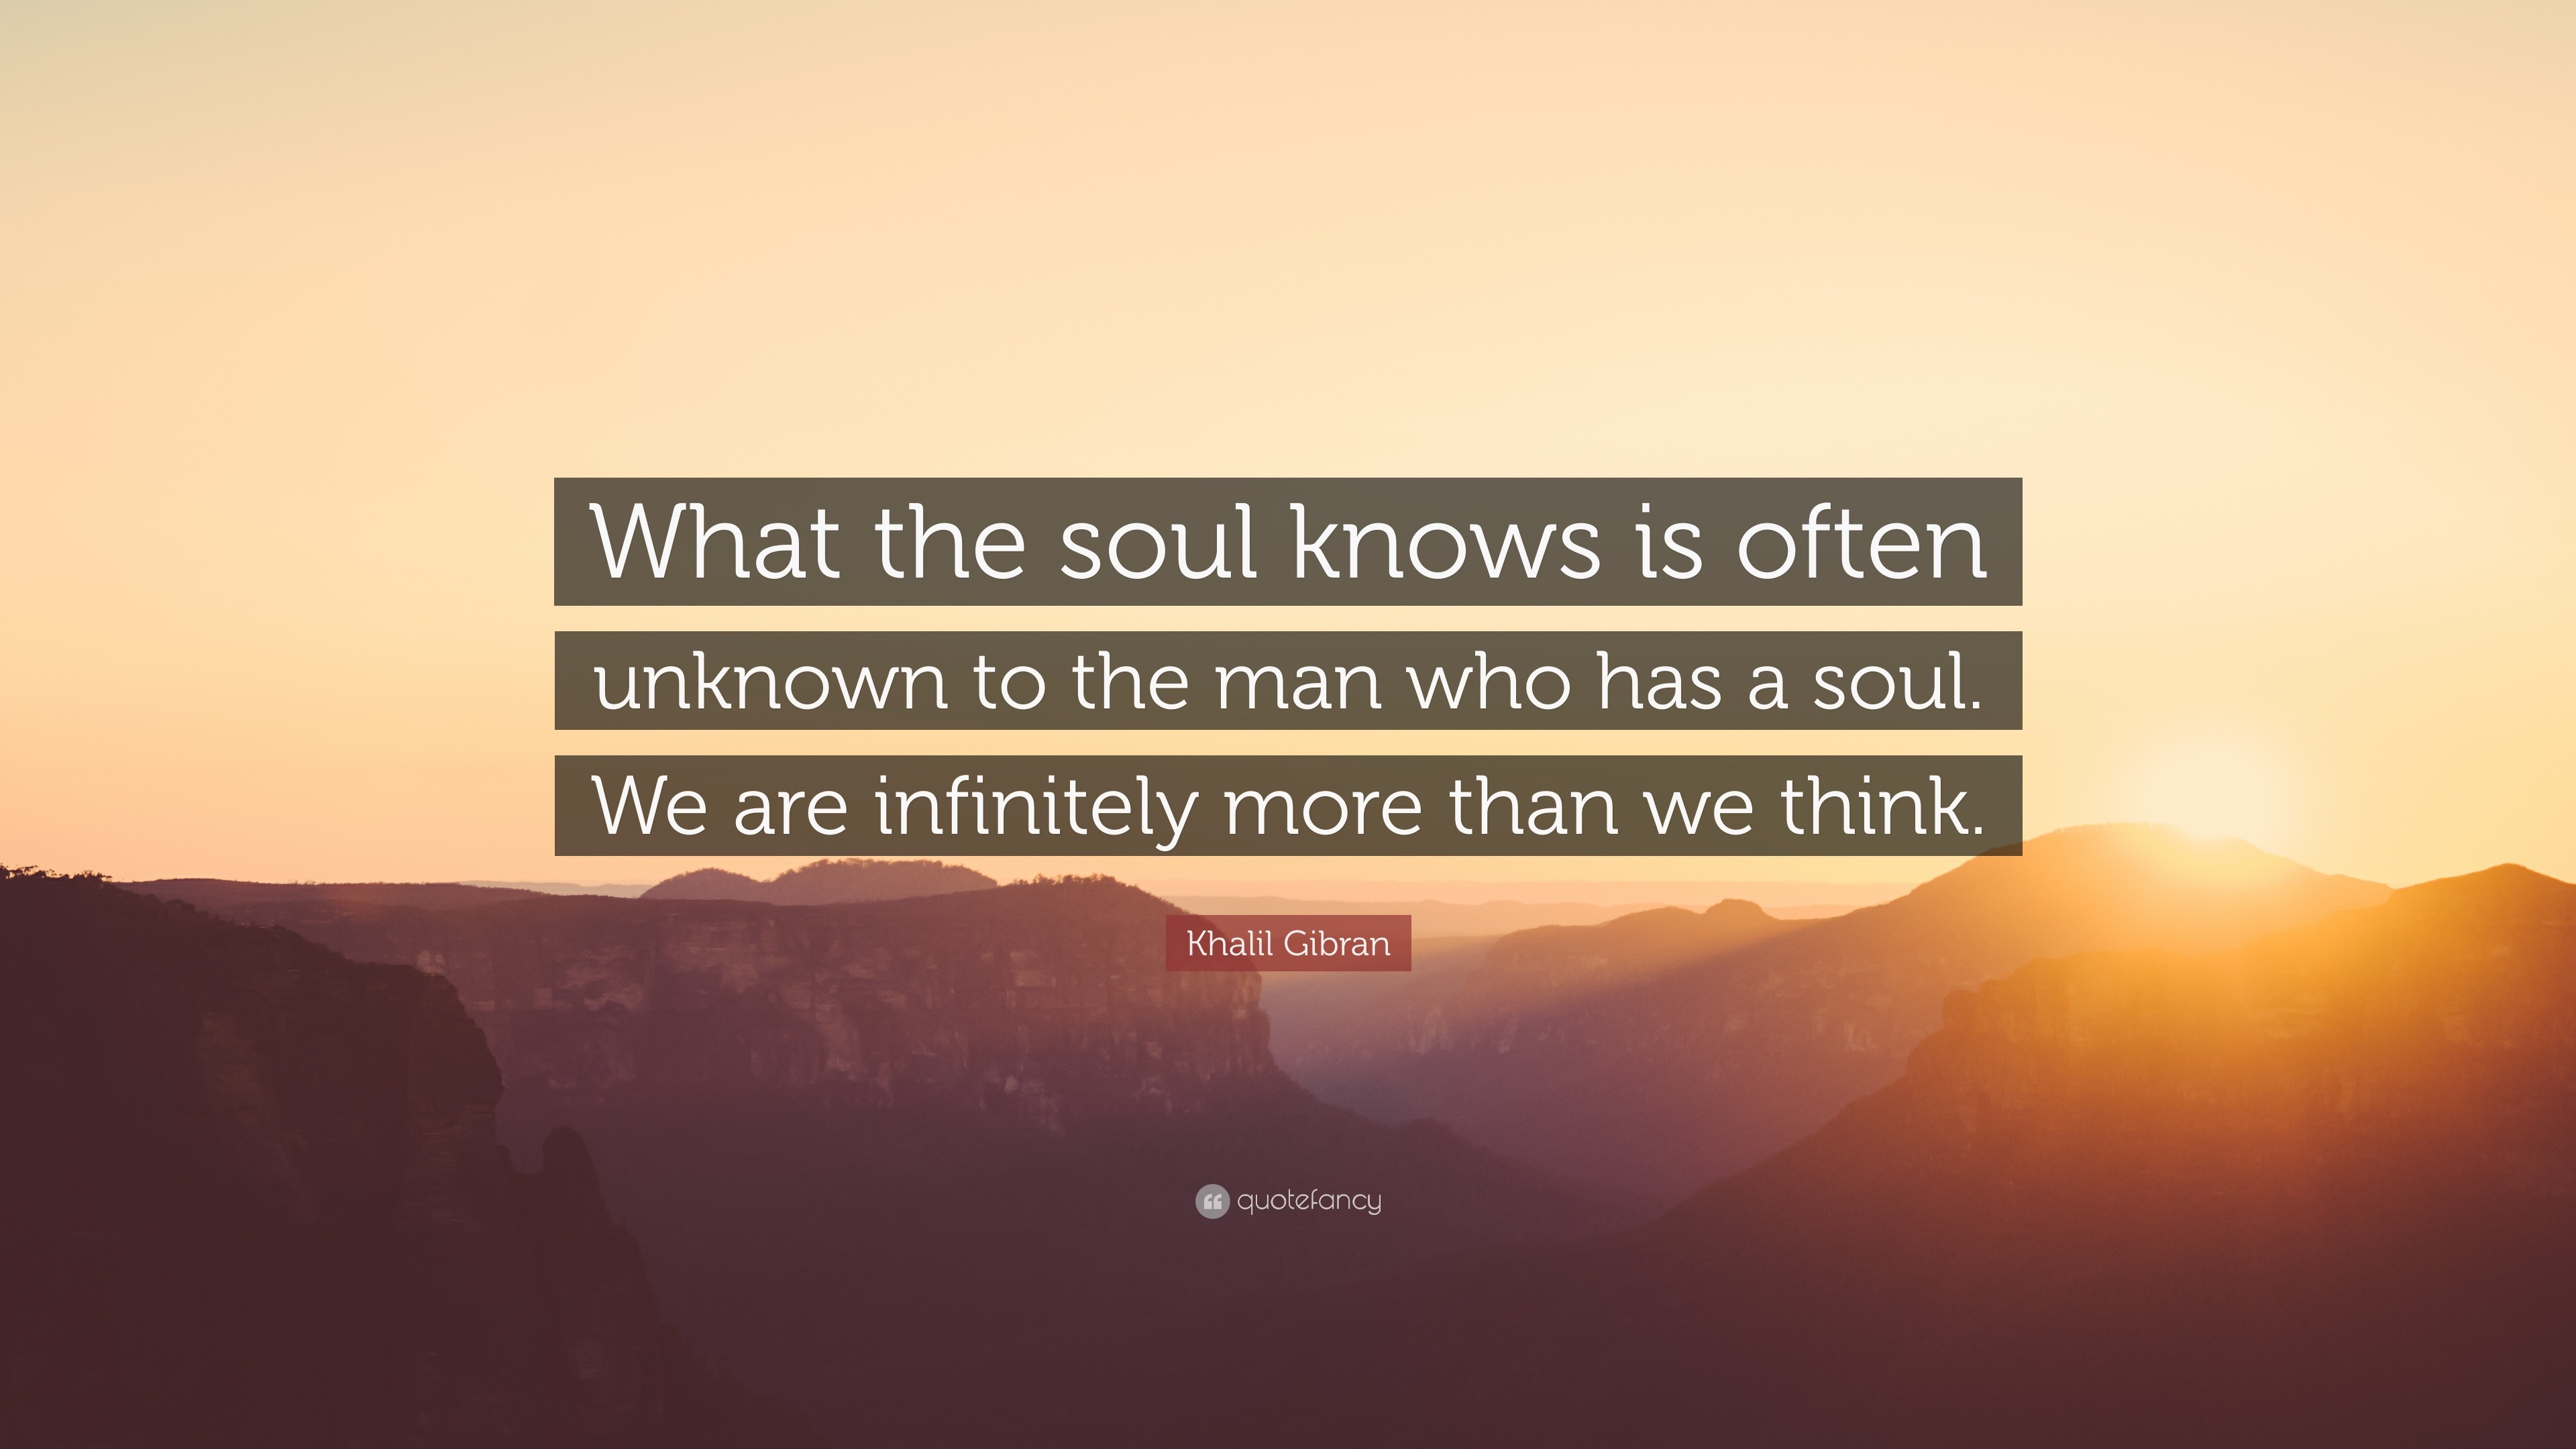 Khalil Gibran Quote: “What the soul knows is often unknown to the man ...